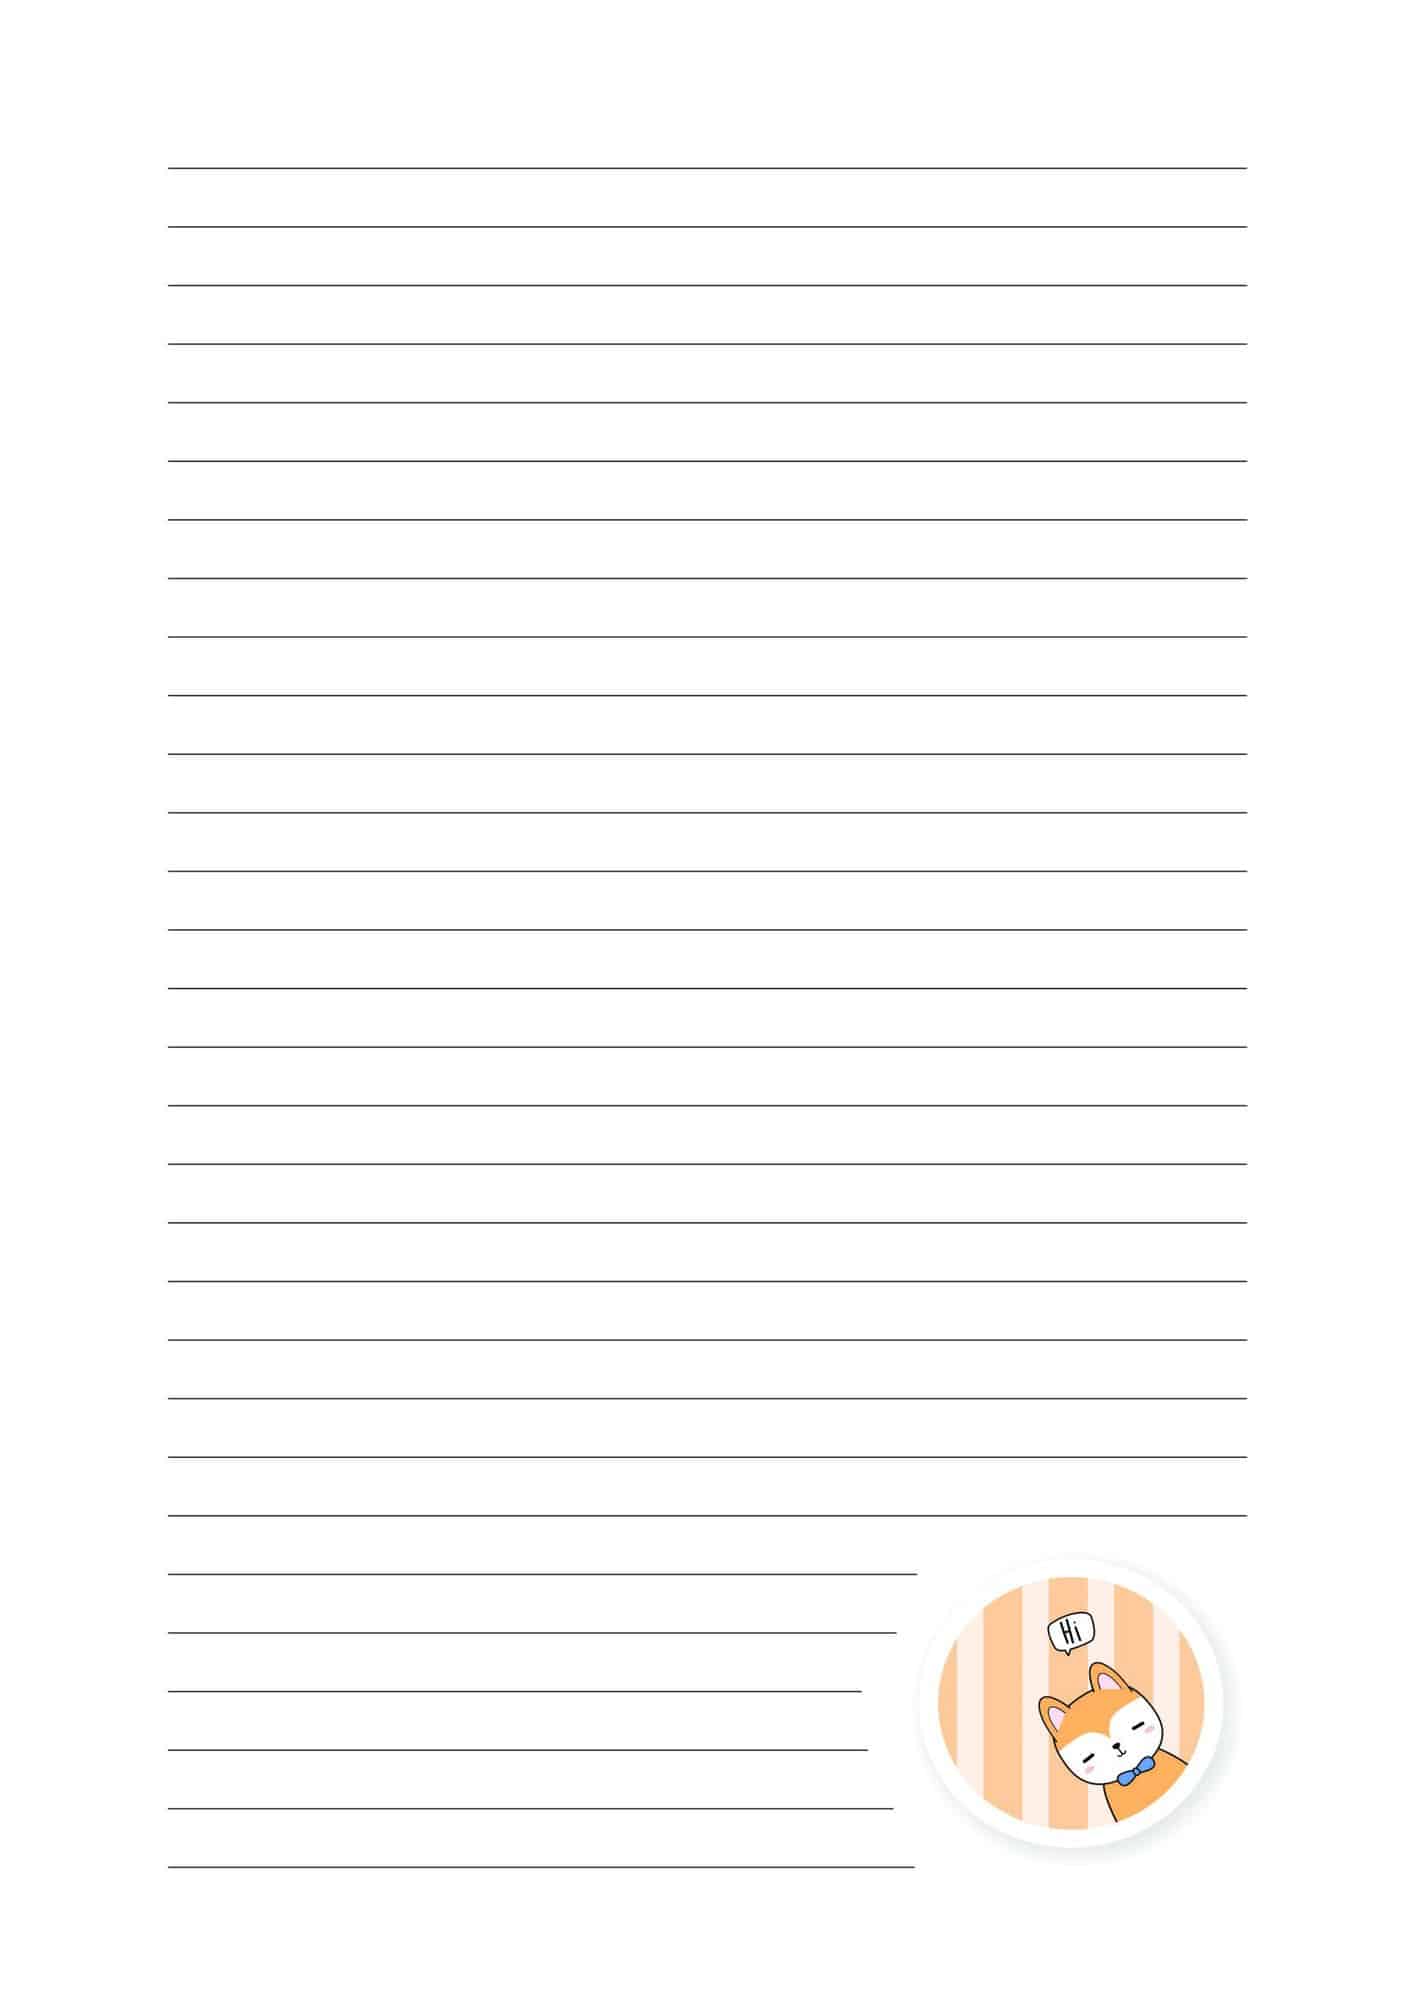 Lined paper template with dog image.